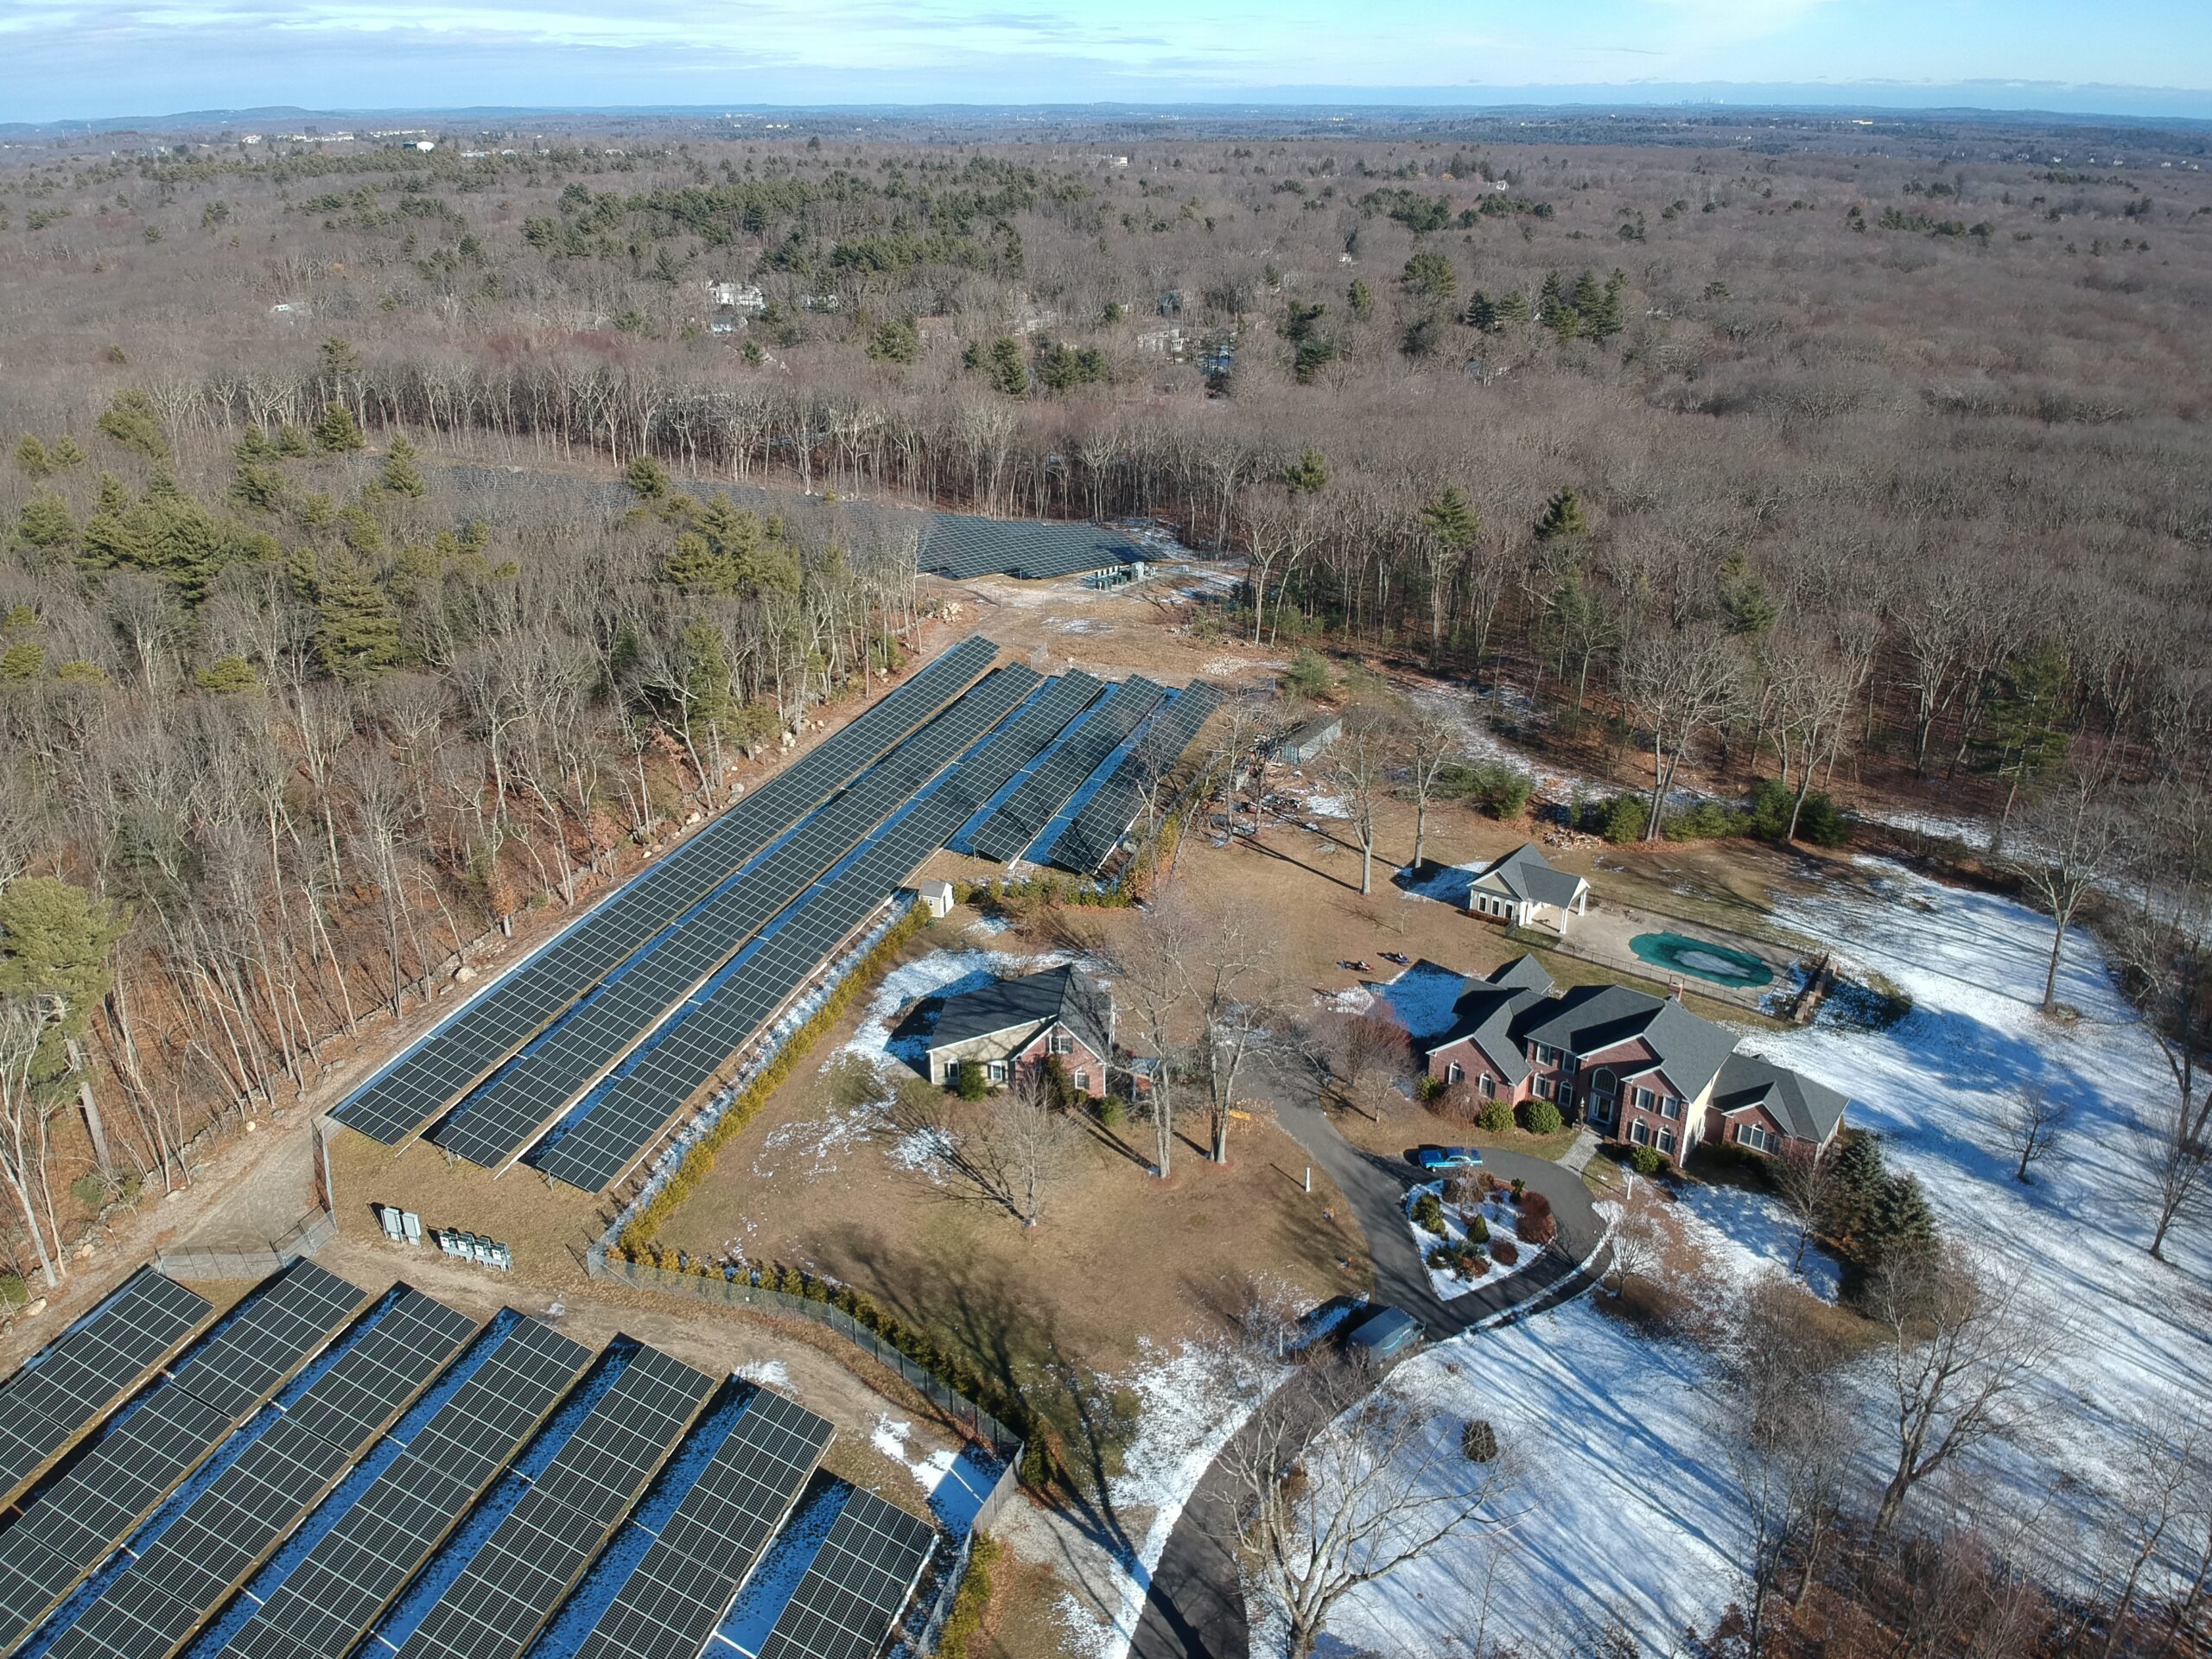 Planning Board reconsiders best approach to commercial solar zoning